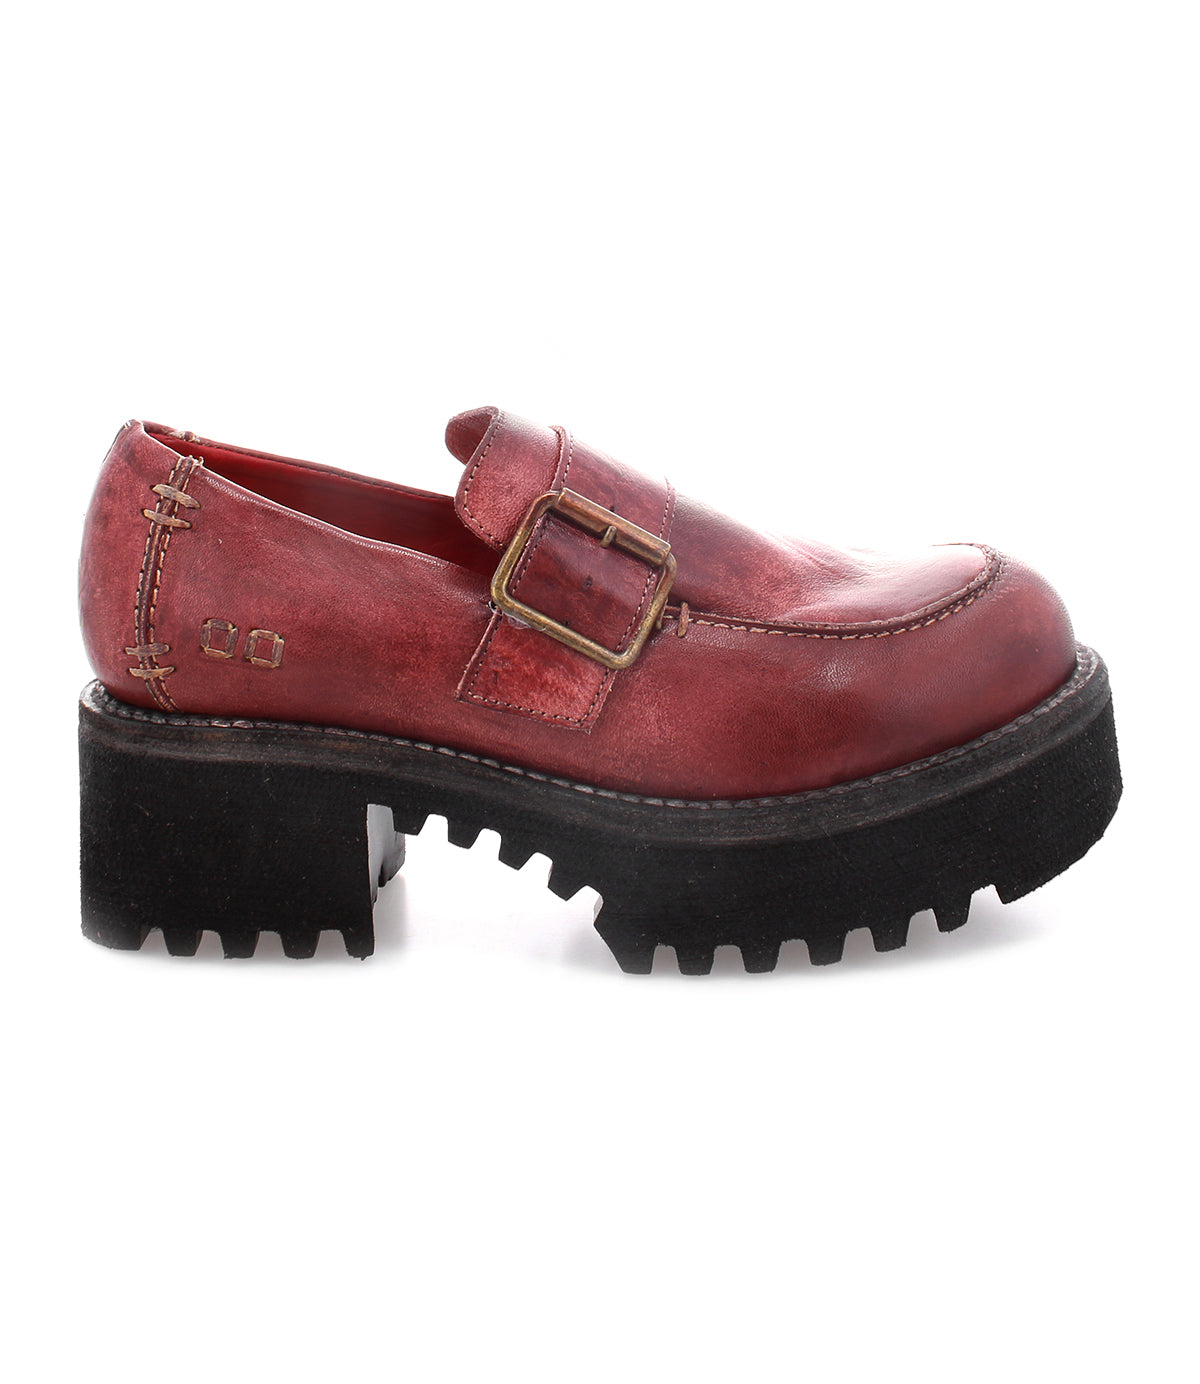 A comfortable fall fashion Kavi leather loafer for women by Bed Stu.